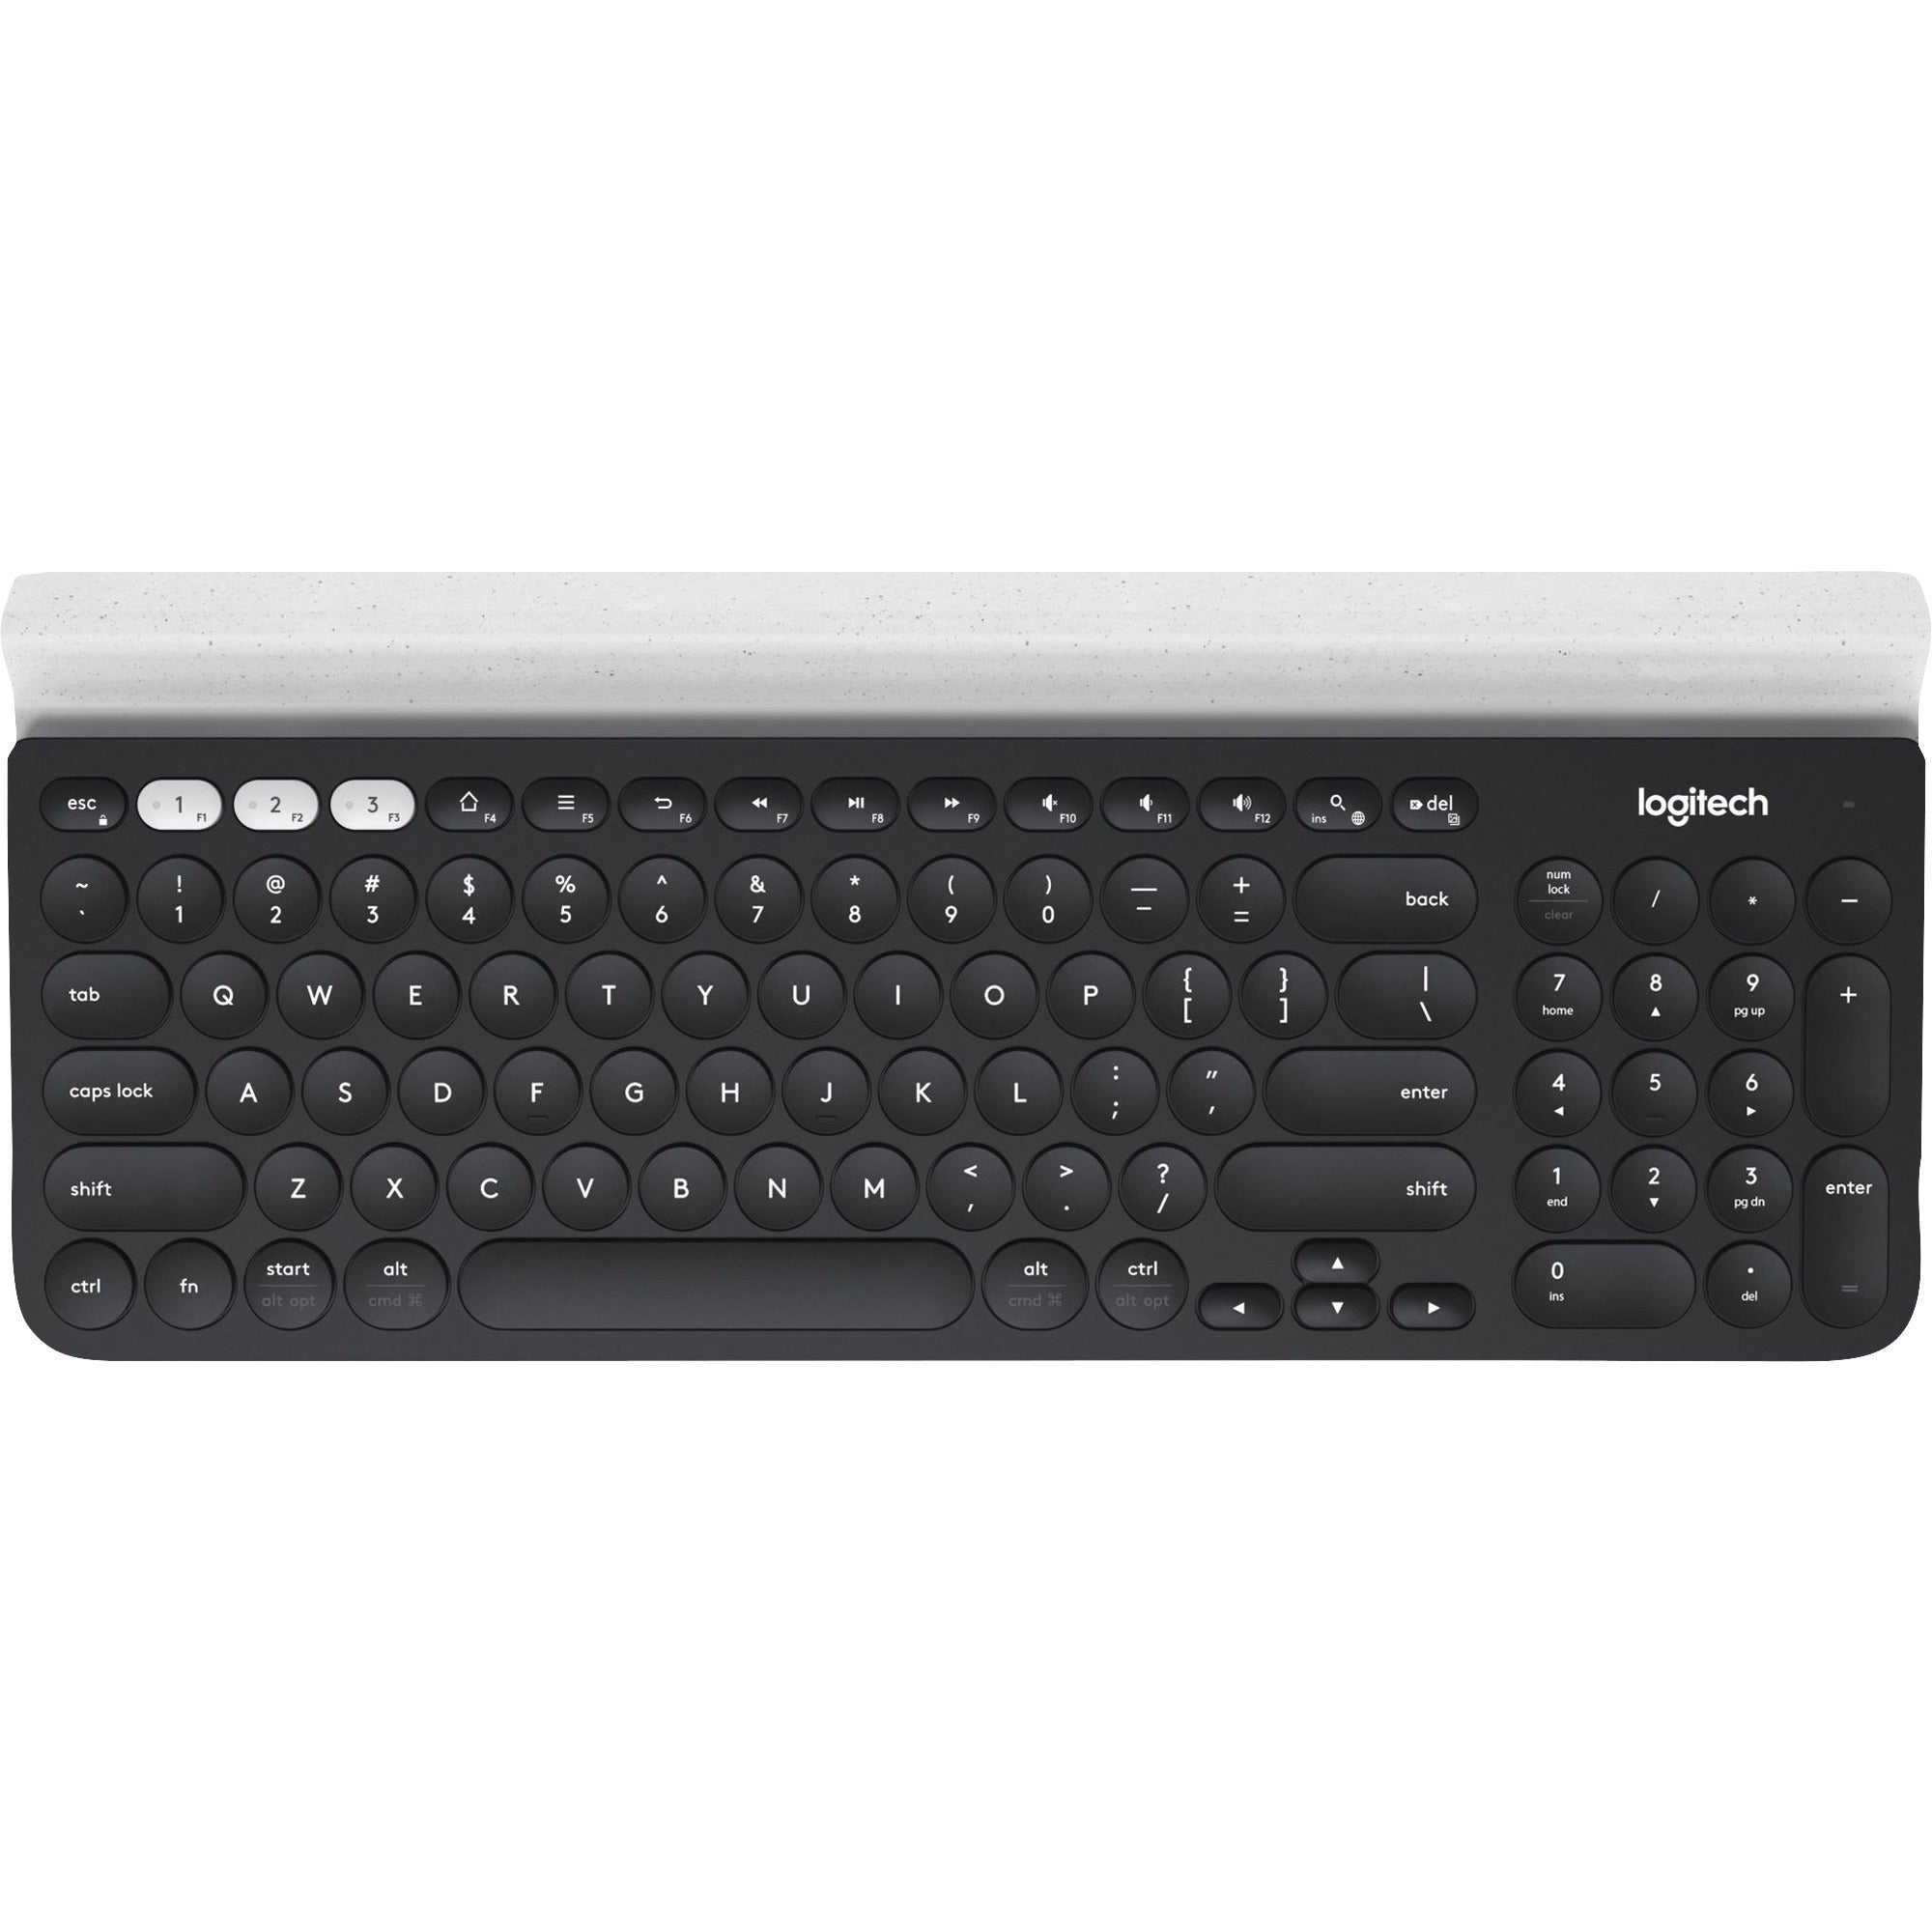 logitech-k780-multi-device-wireless-keyboard-wireless-connectivity-bluetooth-33-ft-240-ghz-usb-interface-home-search-back-app-switch-easy-switch-on-off-switch-hot-keys-chromeos-english-french-qwerty-layout-tablet-computer_log920008149 - 1